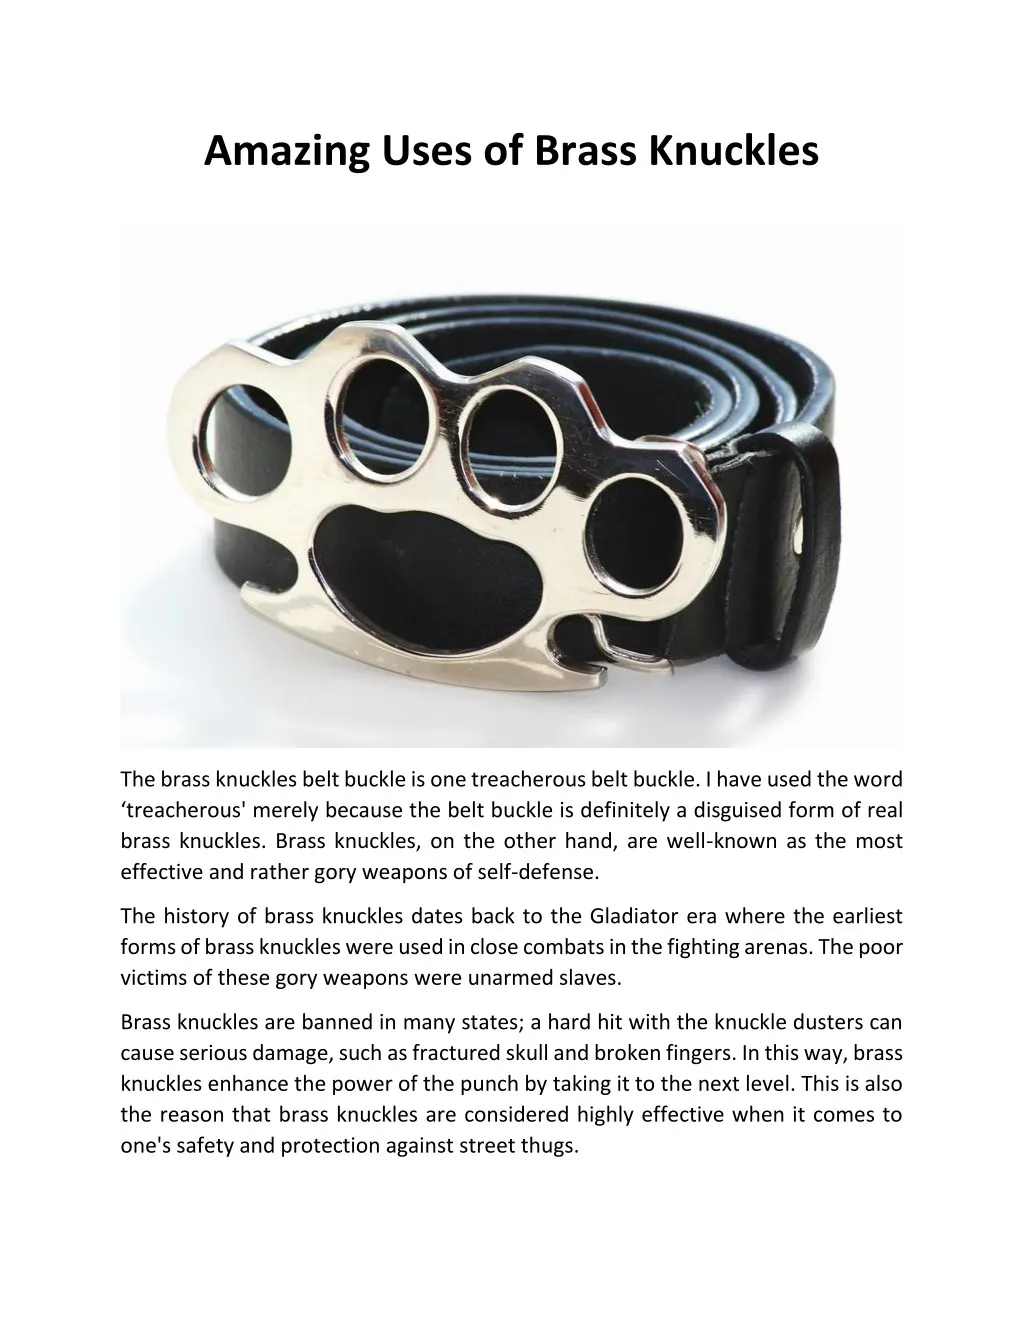 amazing uses of brass knuckles